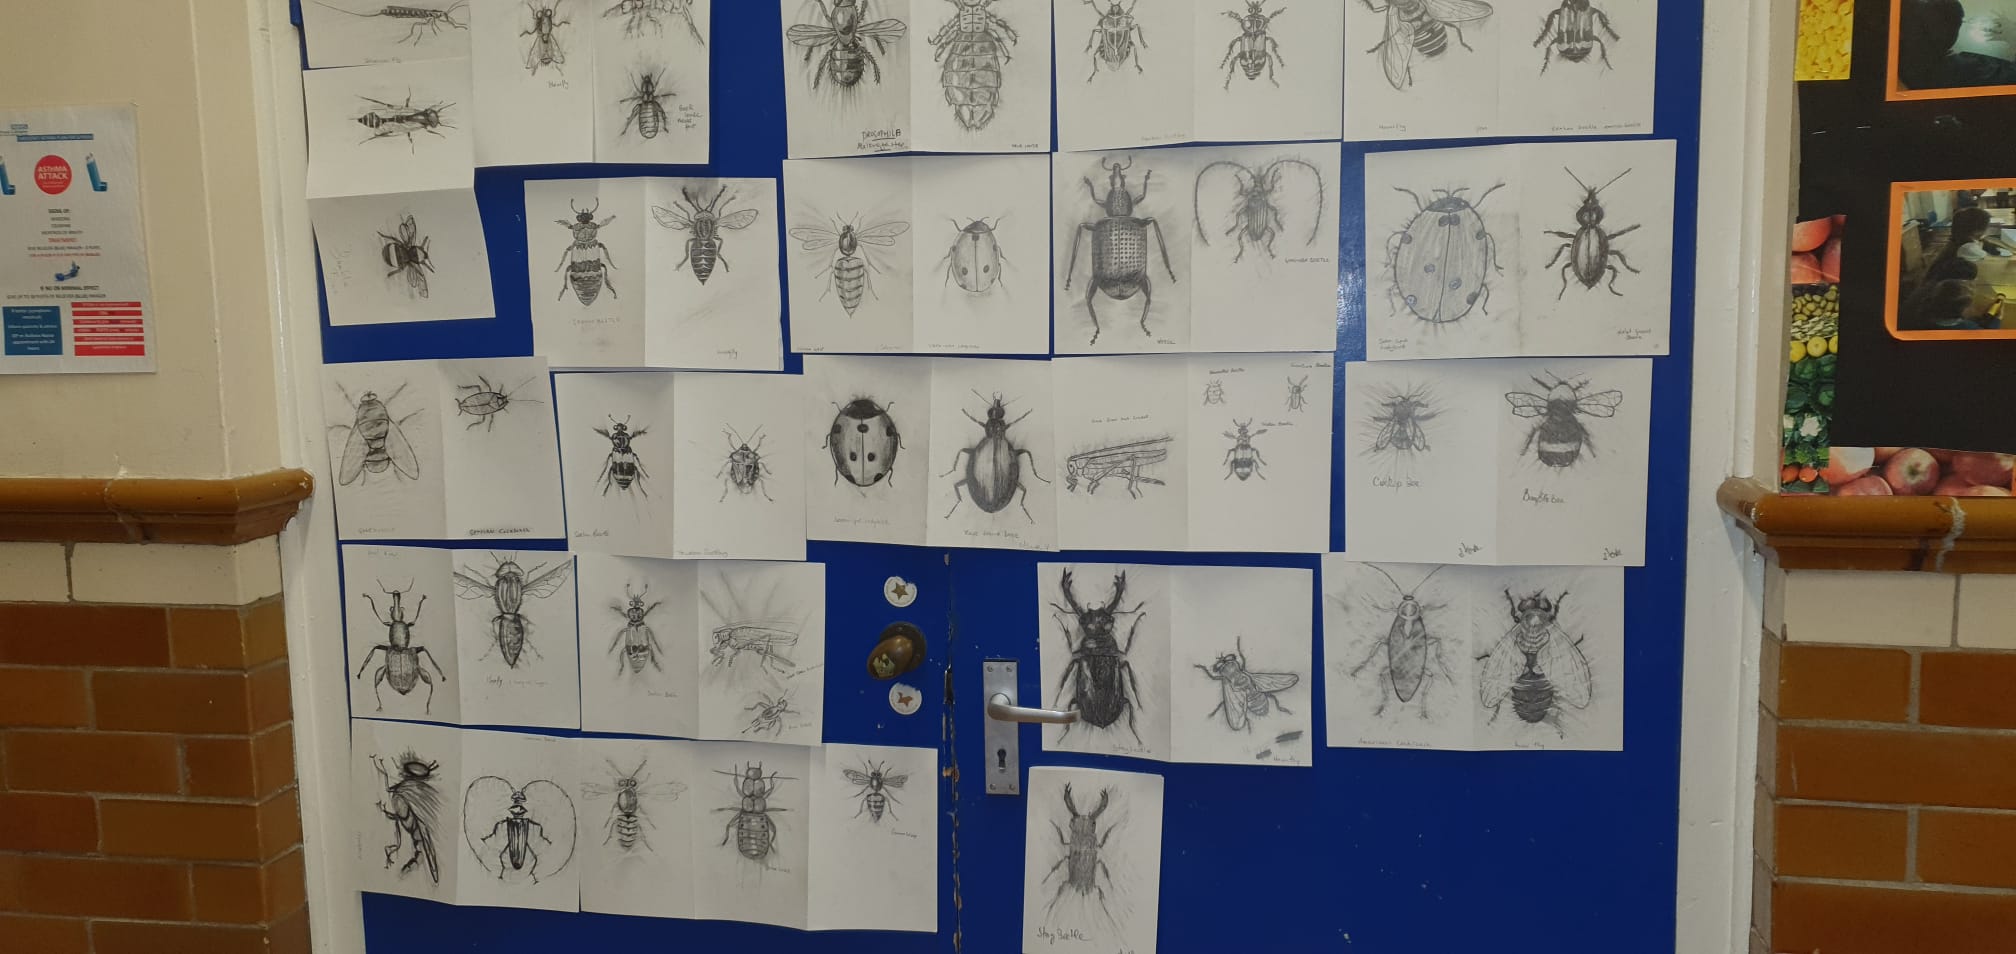 Pencil drawings of insects